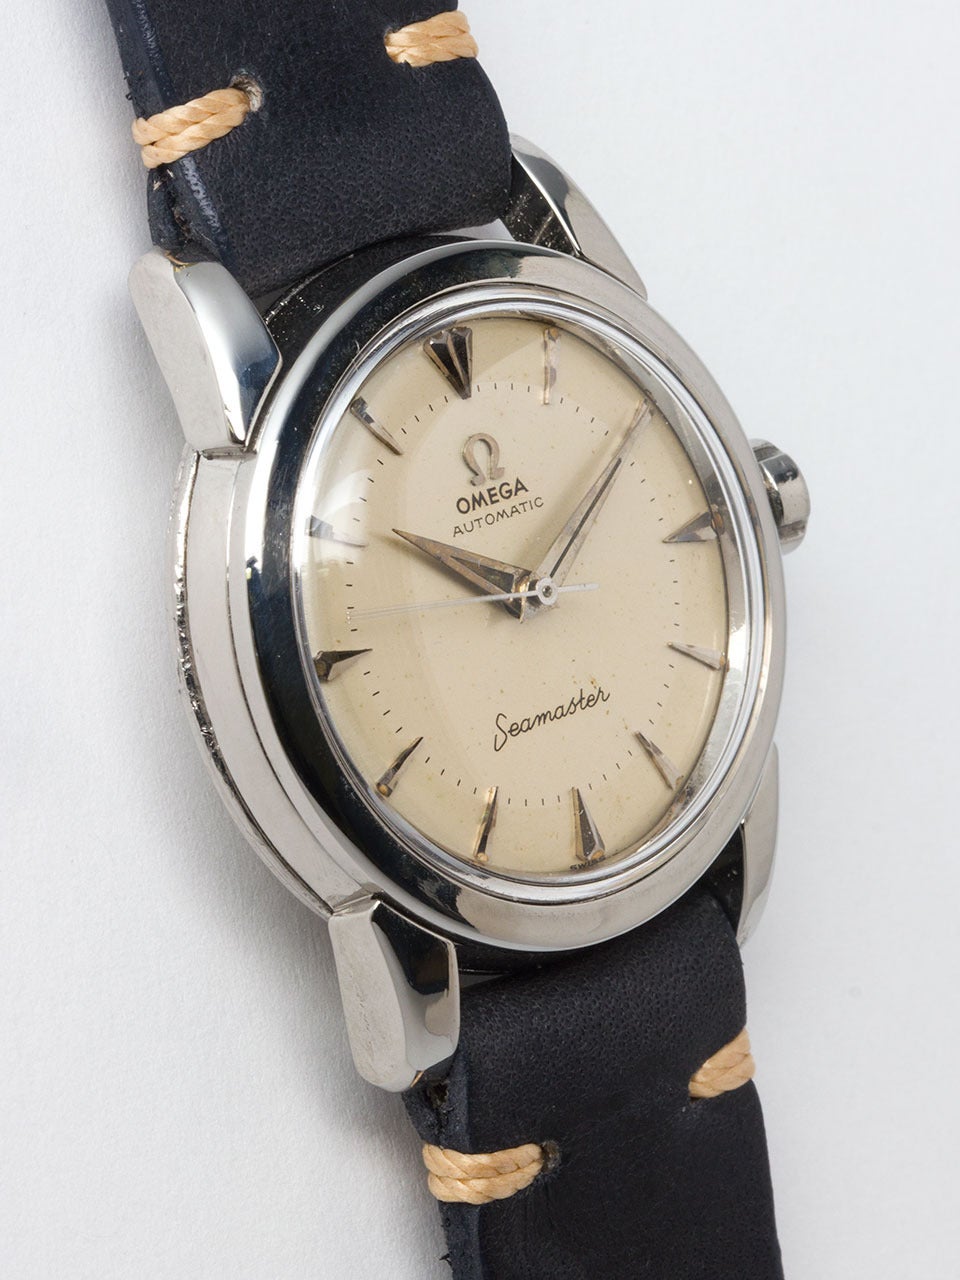 Omega Stainless Steel Seamaster Wristwatch circa 1950s. 31 x 39mm medium size case with wide bezel, heavy snap back case and signed Omega crown. With original matte silvered dial with applied triangular indexes, applied Omega logo, inner minute